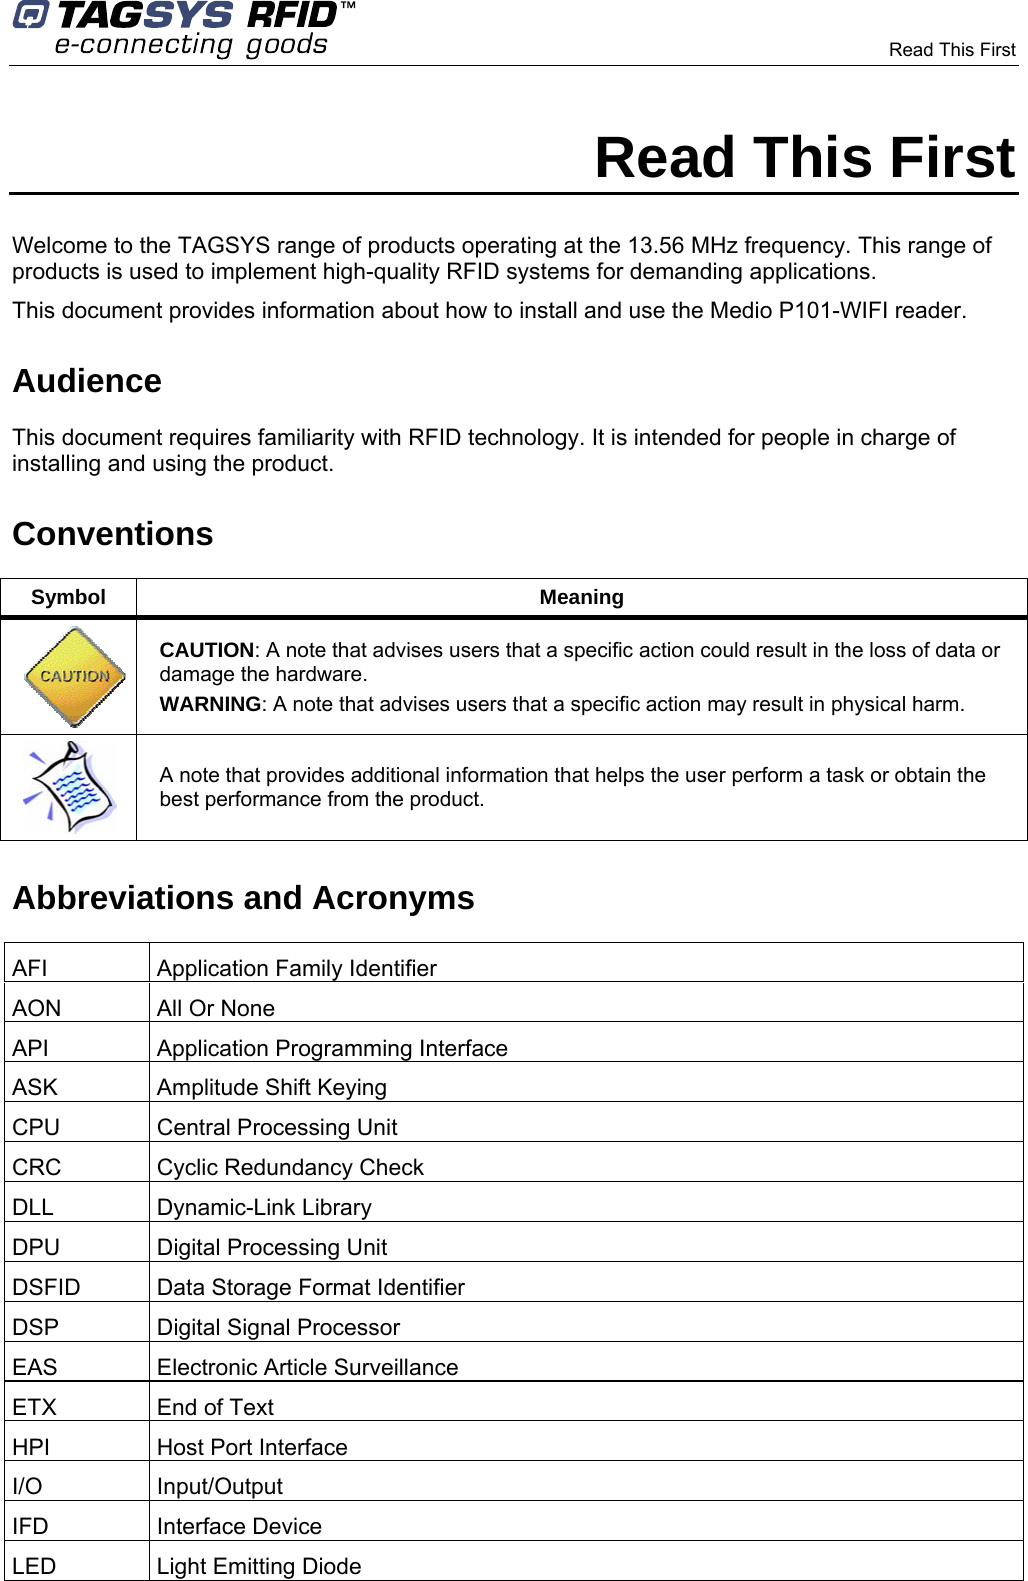      Read This First        Read This First Welcome to the TAGSYS range of products operating at the 13.56 MHz frequency. This range of products is used to implement high-quality RFID systems for demanding applications. This document provides information about how to install and use the Medio P101-WIFI reader.  Audience This document requires familiarity with RFID technology. It is intended for people in charge of installing and using the product. Conventions Symbol Meaning  CAUTION: A note that advises users that a specific action could result in the loss of data or damage the hardware. WARNING: A note that advises users that a specific action may result in physical harm.   A note that provides additional information that helps the user perform a task or obtain the best performance from the product. Abbreviations and Acronyms AFI Application Family Identifier AON  All Or None API Application Programming Interface ASK  Amplitude Shift Keying CPU  Central Processing Unit CRC  Cyclic Redundancy Check DLL Dynamic-Link Library DPU  Digital Processing Unit DSFID  Data Storage Format Identifier DSP  Digital Signal Processor EAS  Electronic Article Surveillance ETX  End of Text HPI  Host Port Interface I/O Input/Output IFD Interface Device LED  Light Emitting Diode 